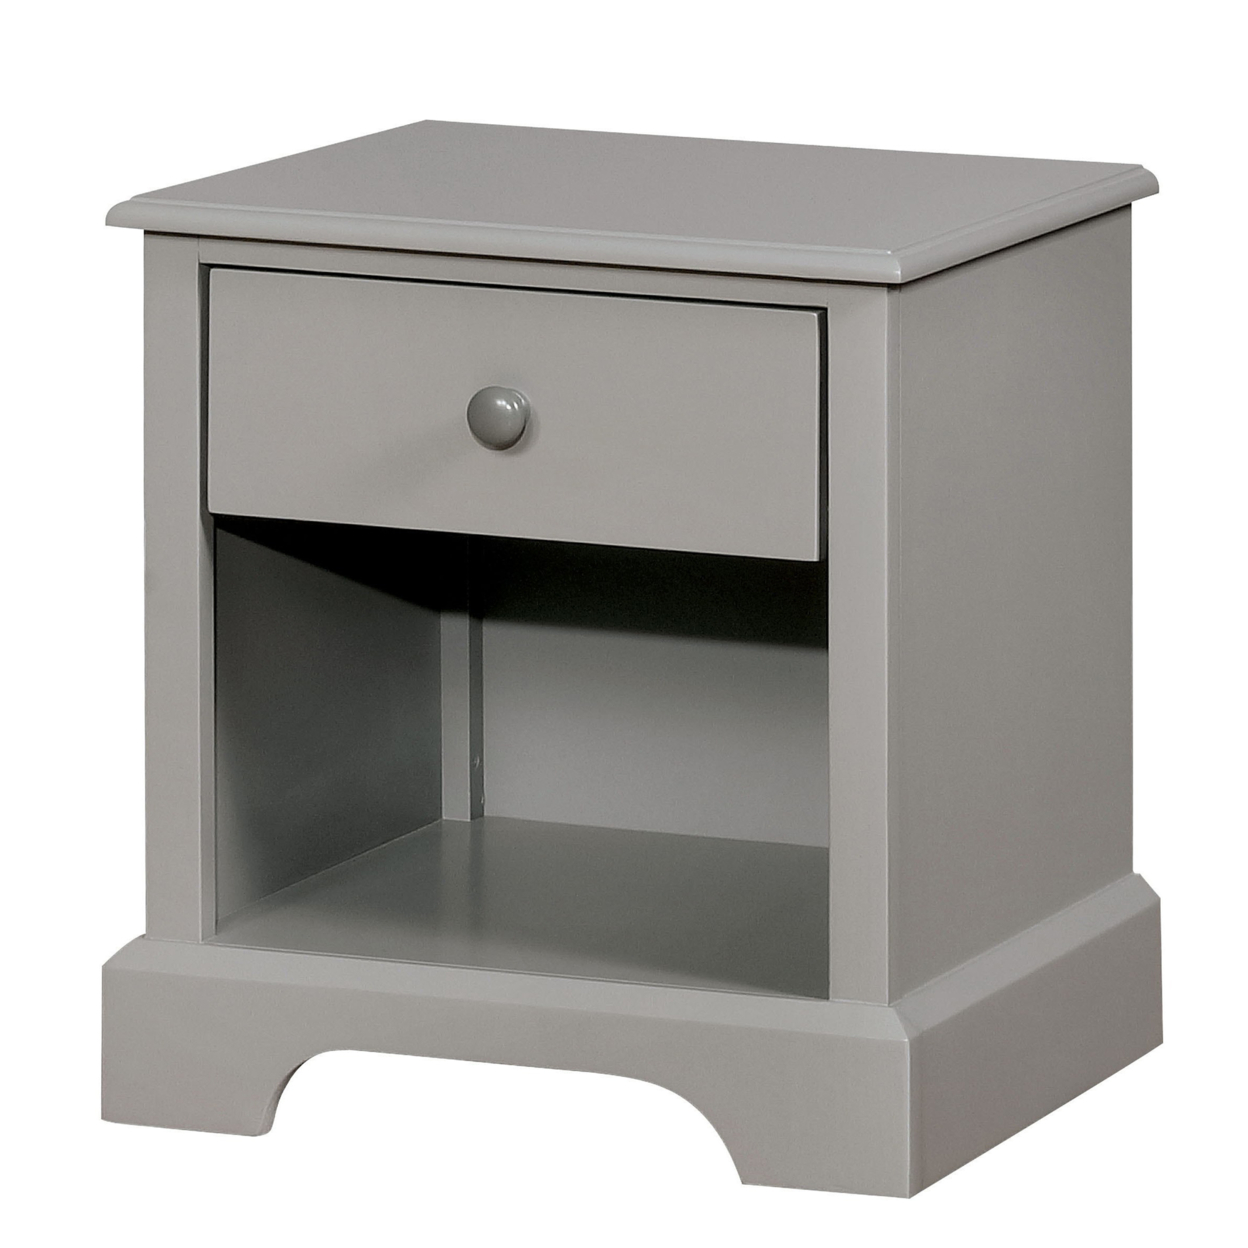 1 Drawer Transitional Wooden Nightstand With Open Compartment, Gray- Saltoro Sherpi